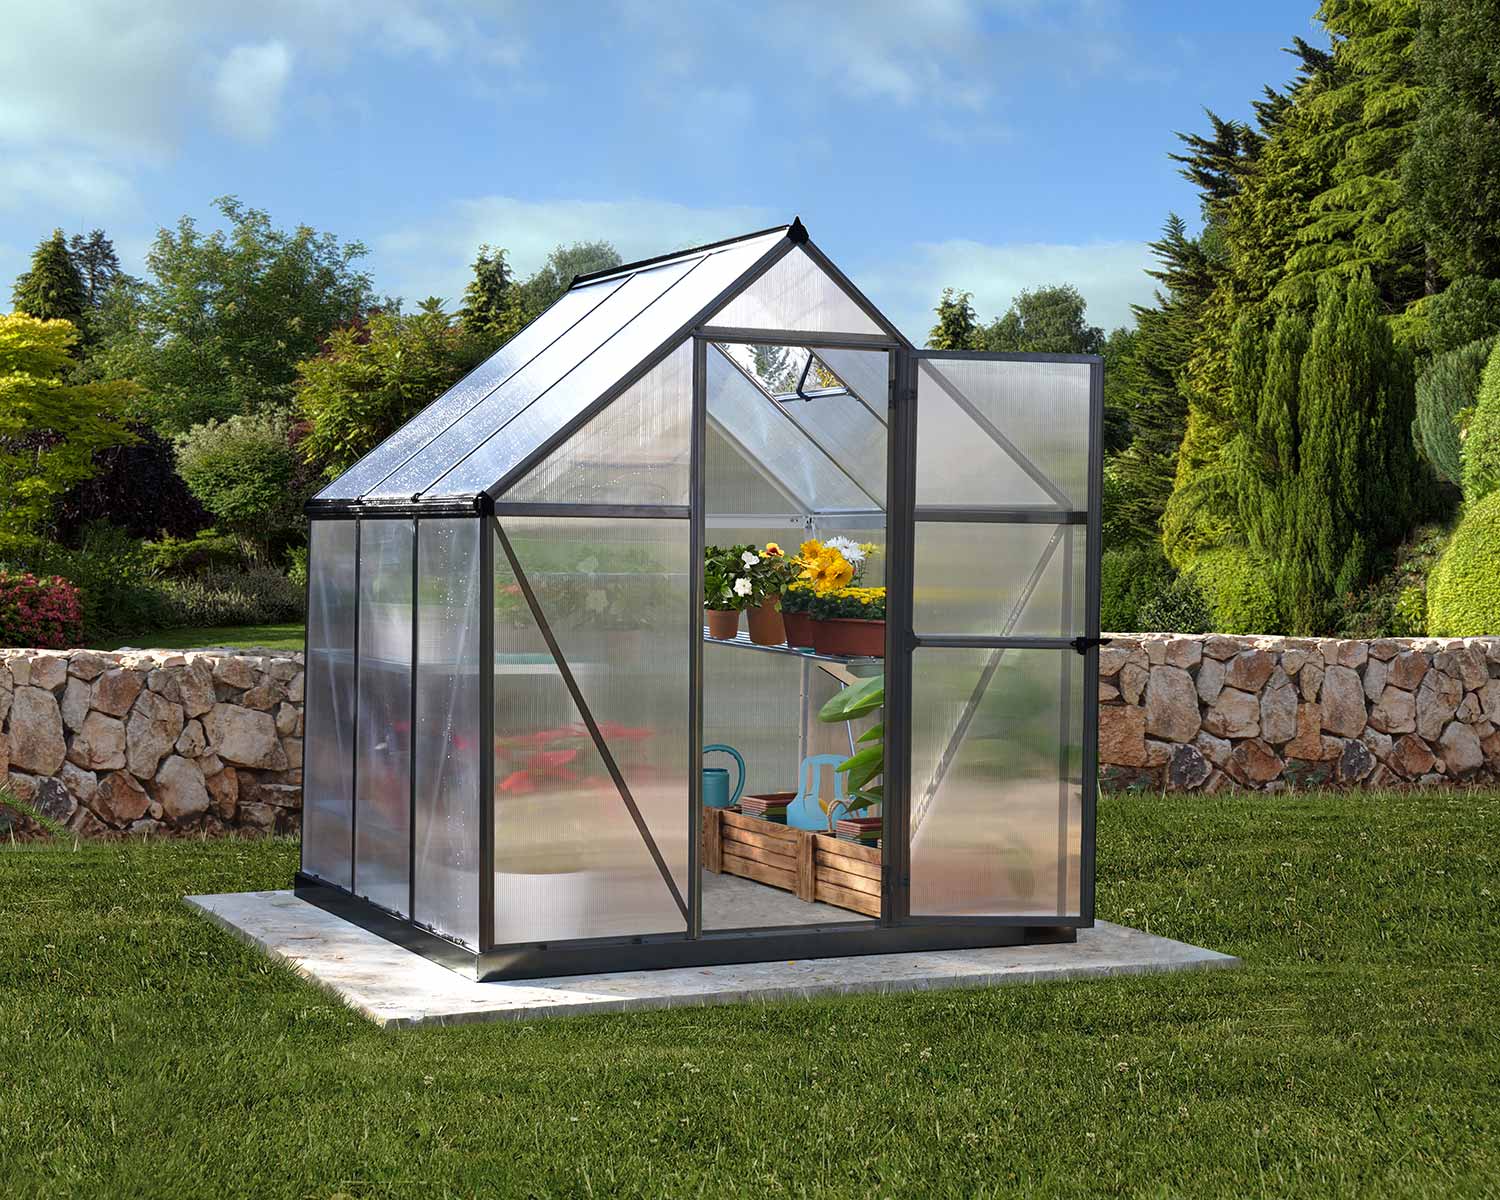 Greenhouse Mythos 6' x 6' Grey Structure & Twinwall Panels outside on a lawn